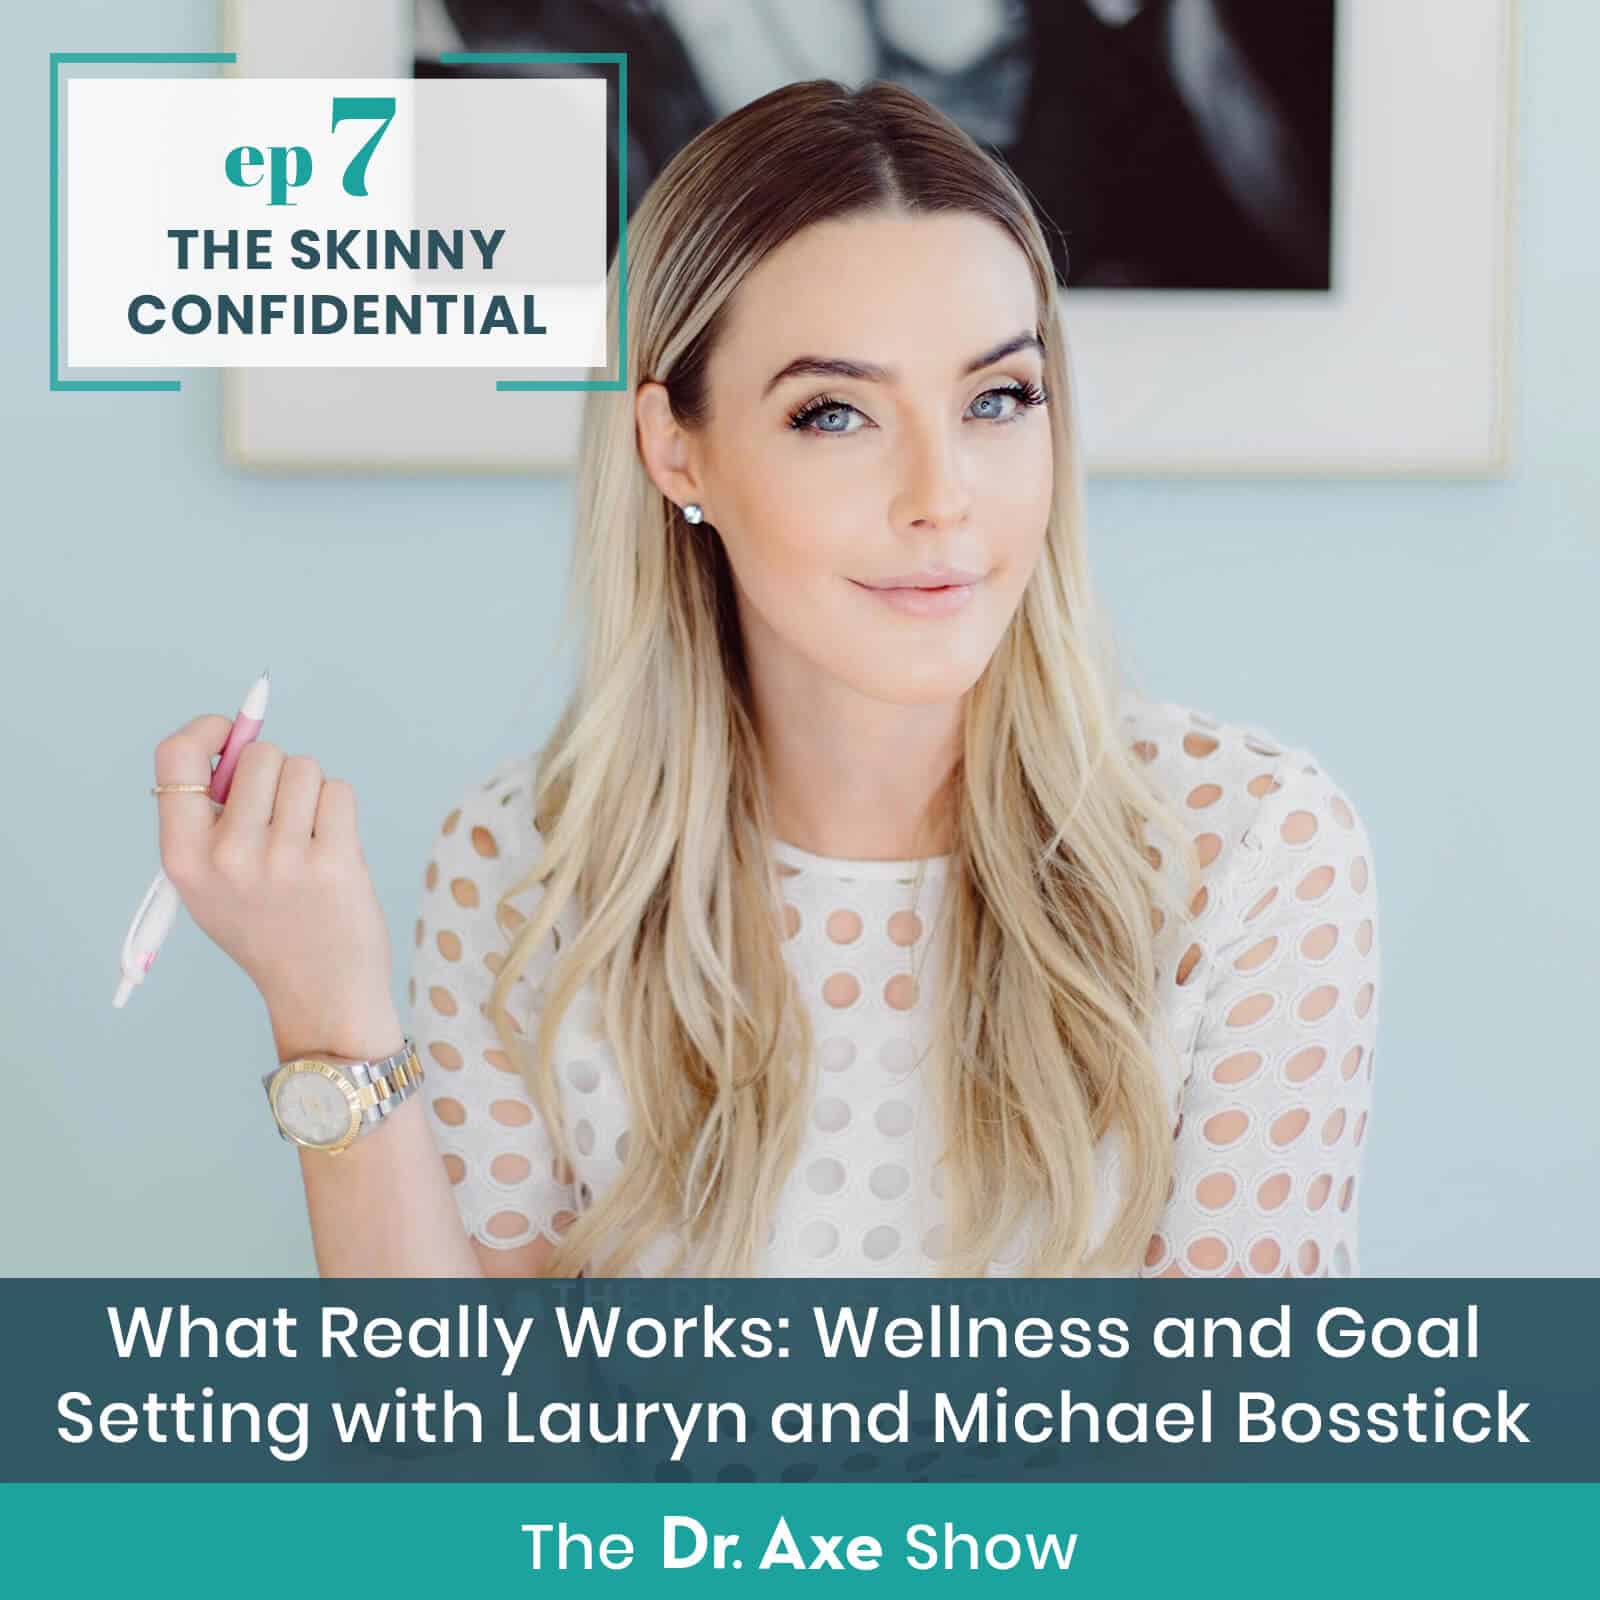 Episode Seven: What really works: wellness and goal setting with Lauryn and Michael Bosstick